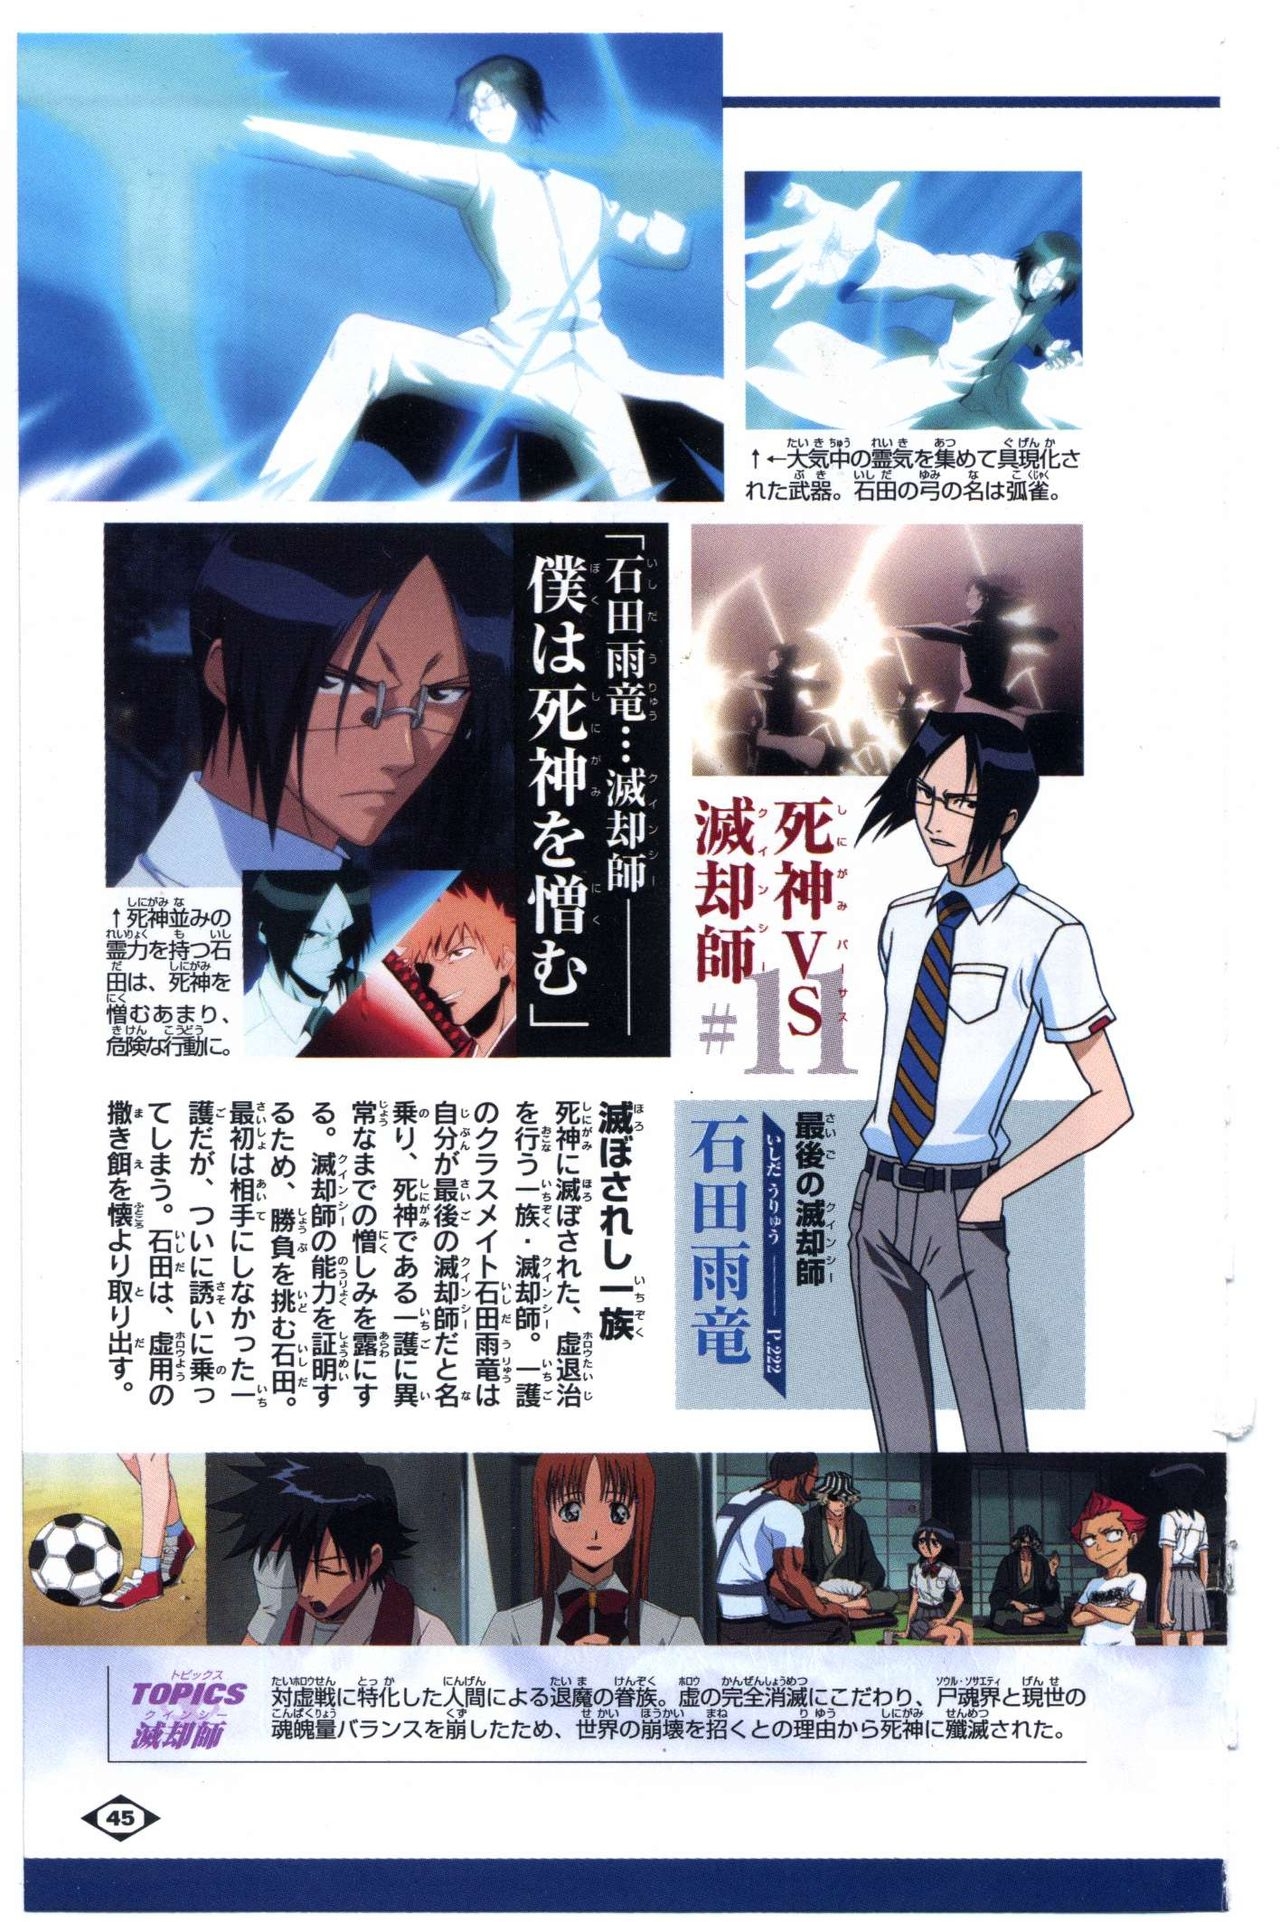 Bleach: Official Animation Book VIBEs 45